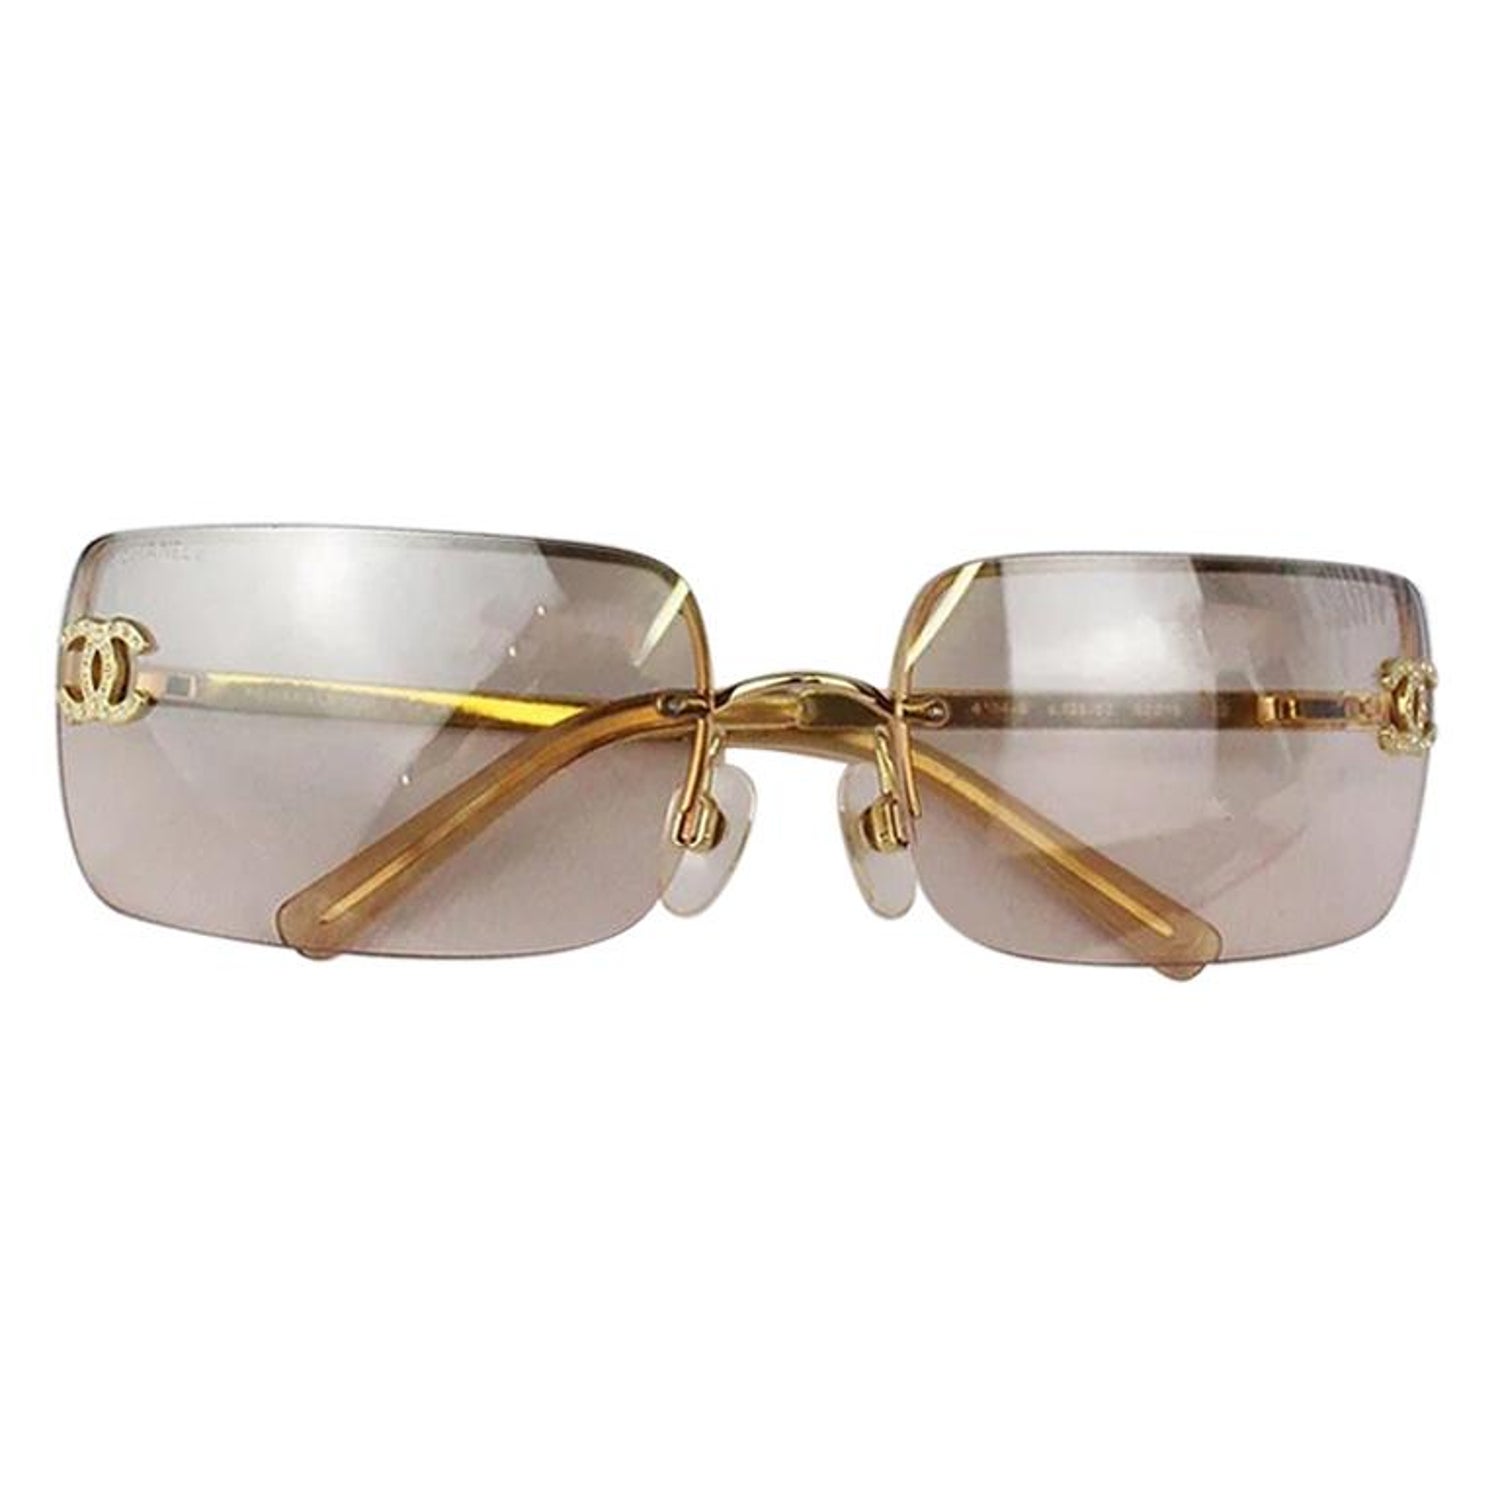 Chanel Kylie Sunglasses - 3 For Sale on 1stDibs